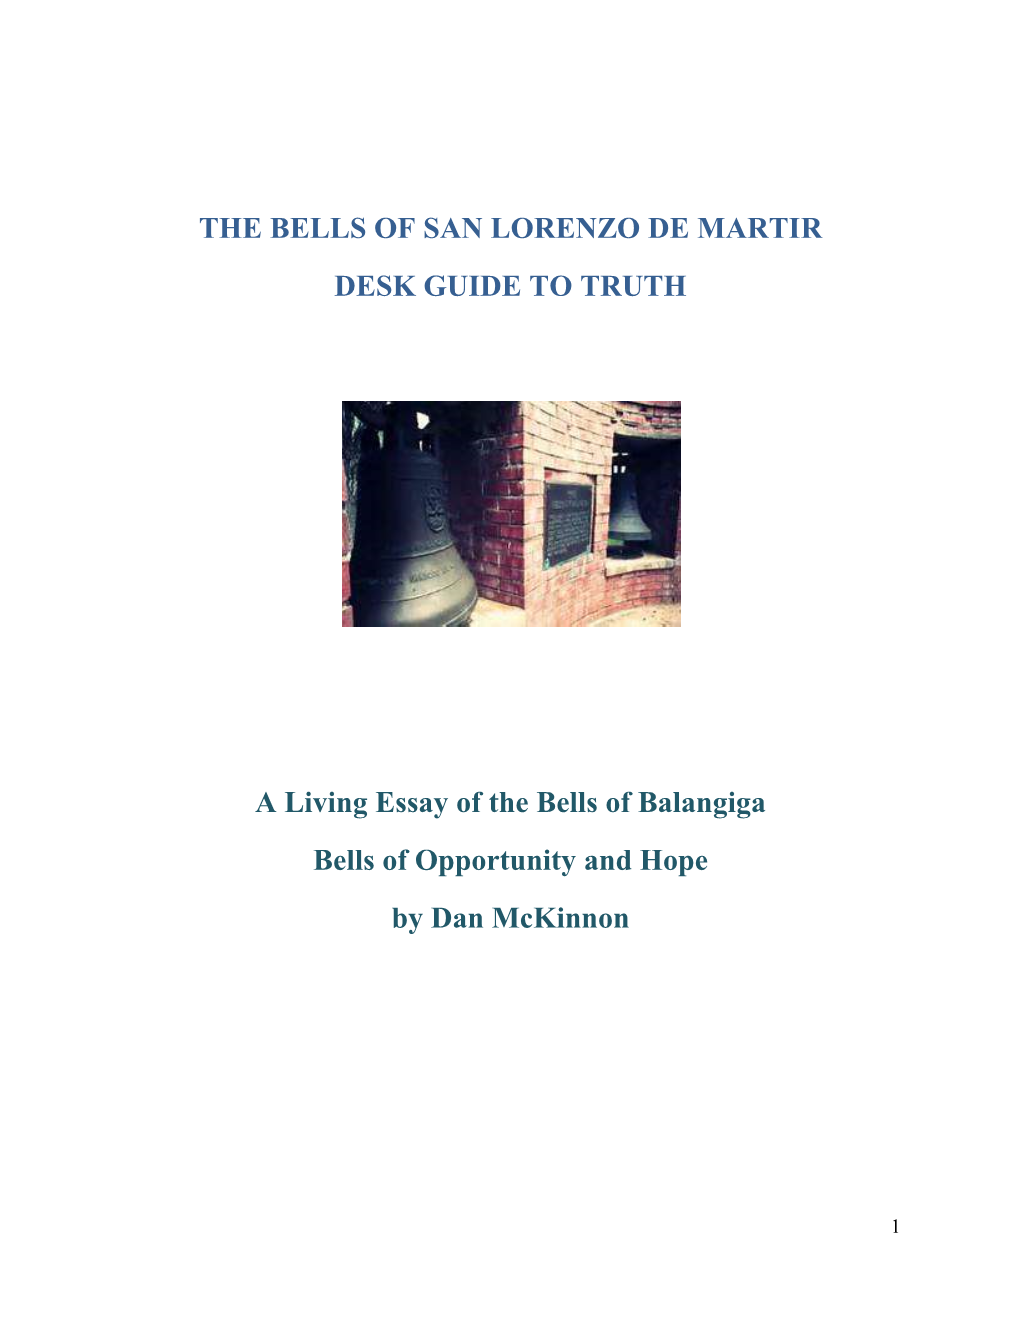 A Living Essay of the Bells of Balangiga Bells of Opportunity and Hope by Dan Mckinnon